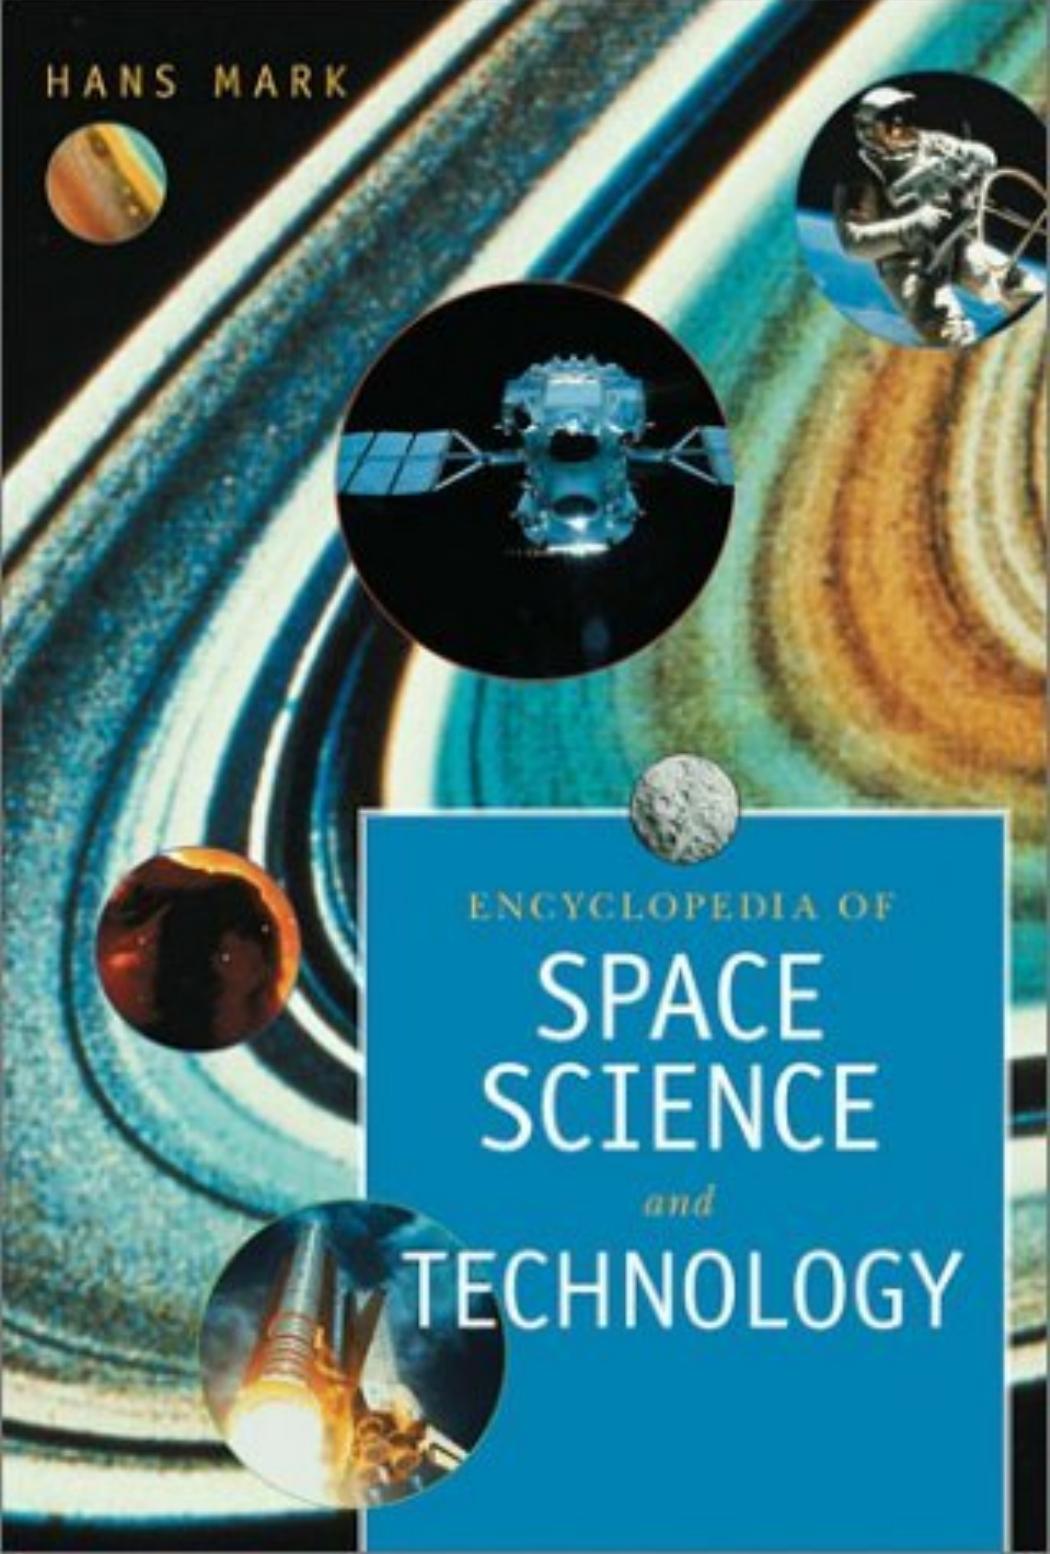 Encyclopedia of Space Science and Technology Volume1. 2003